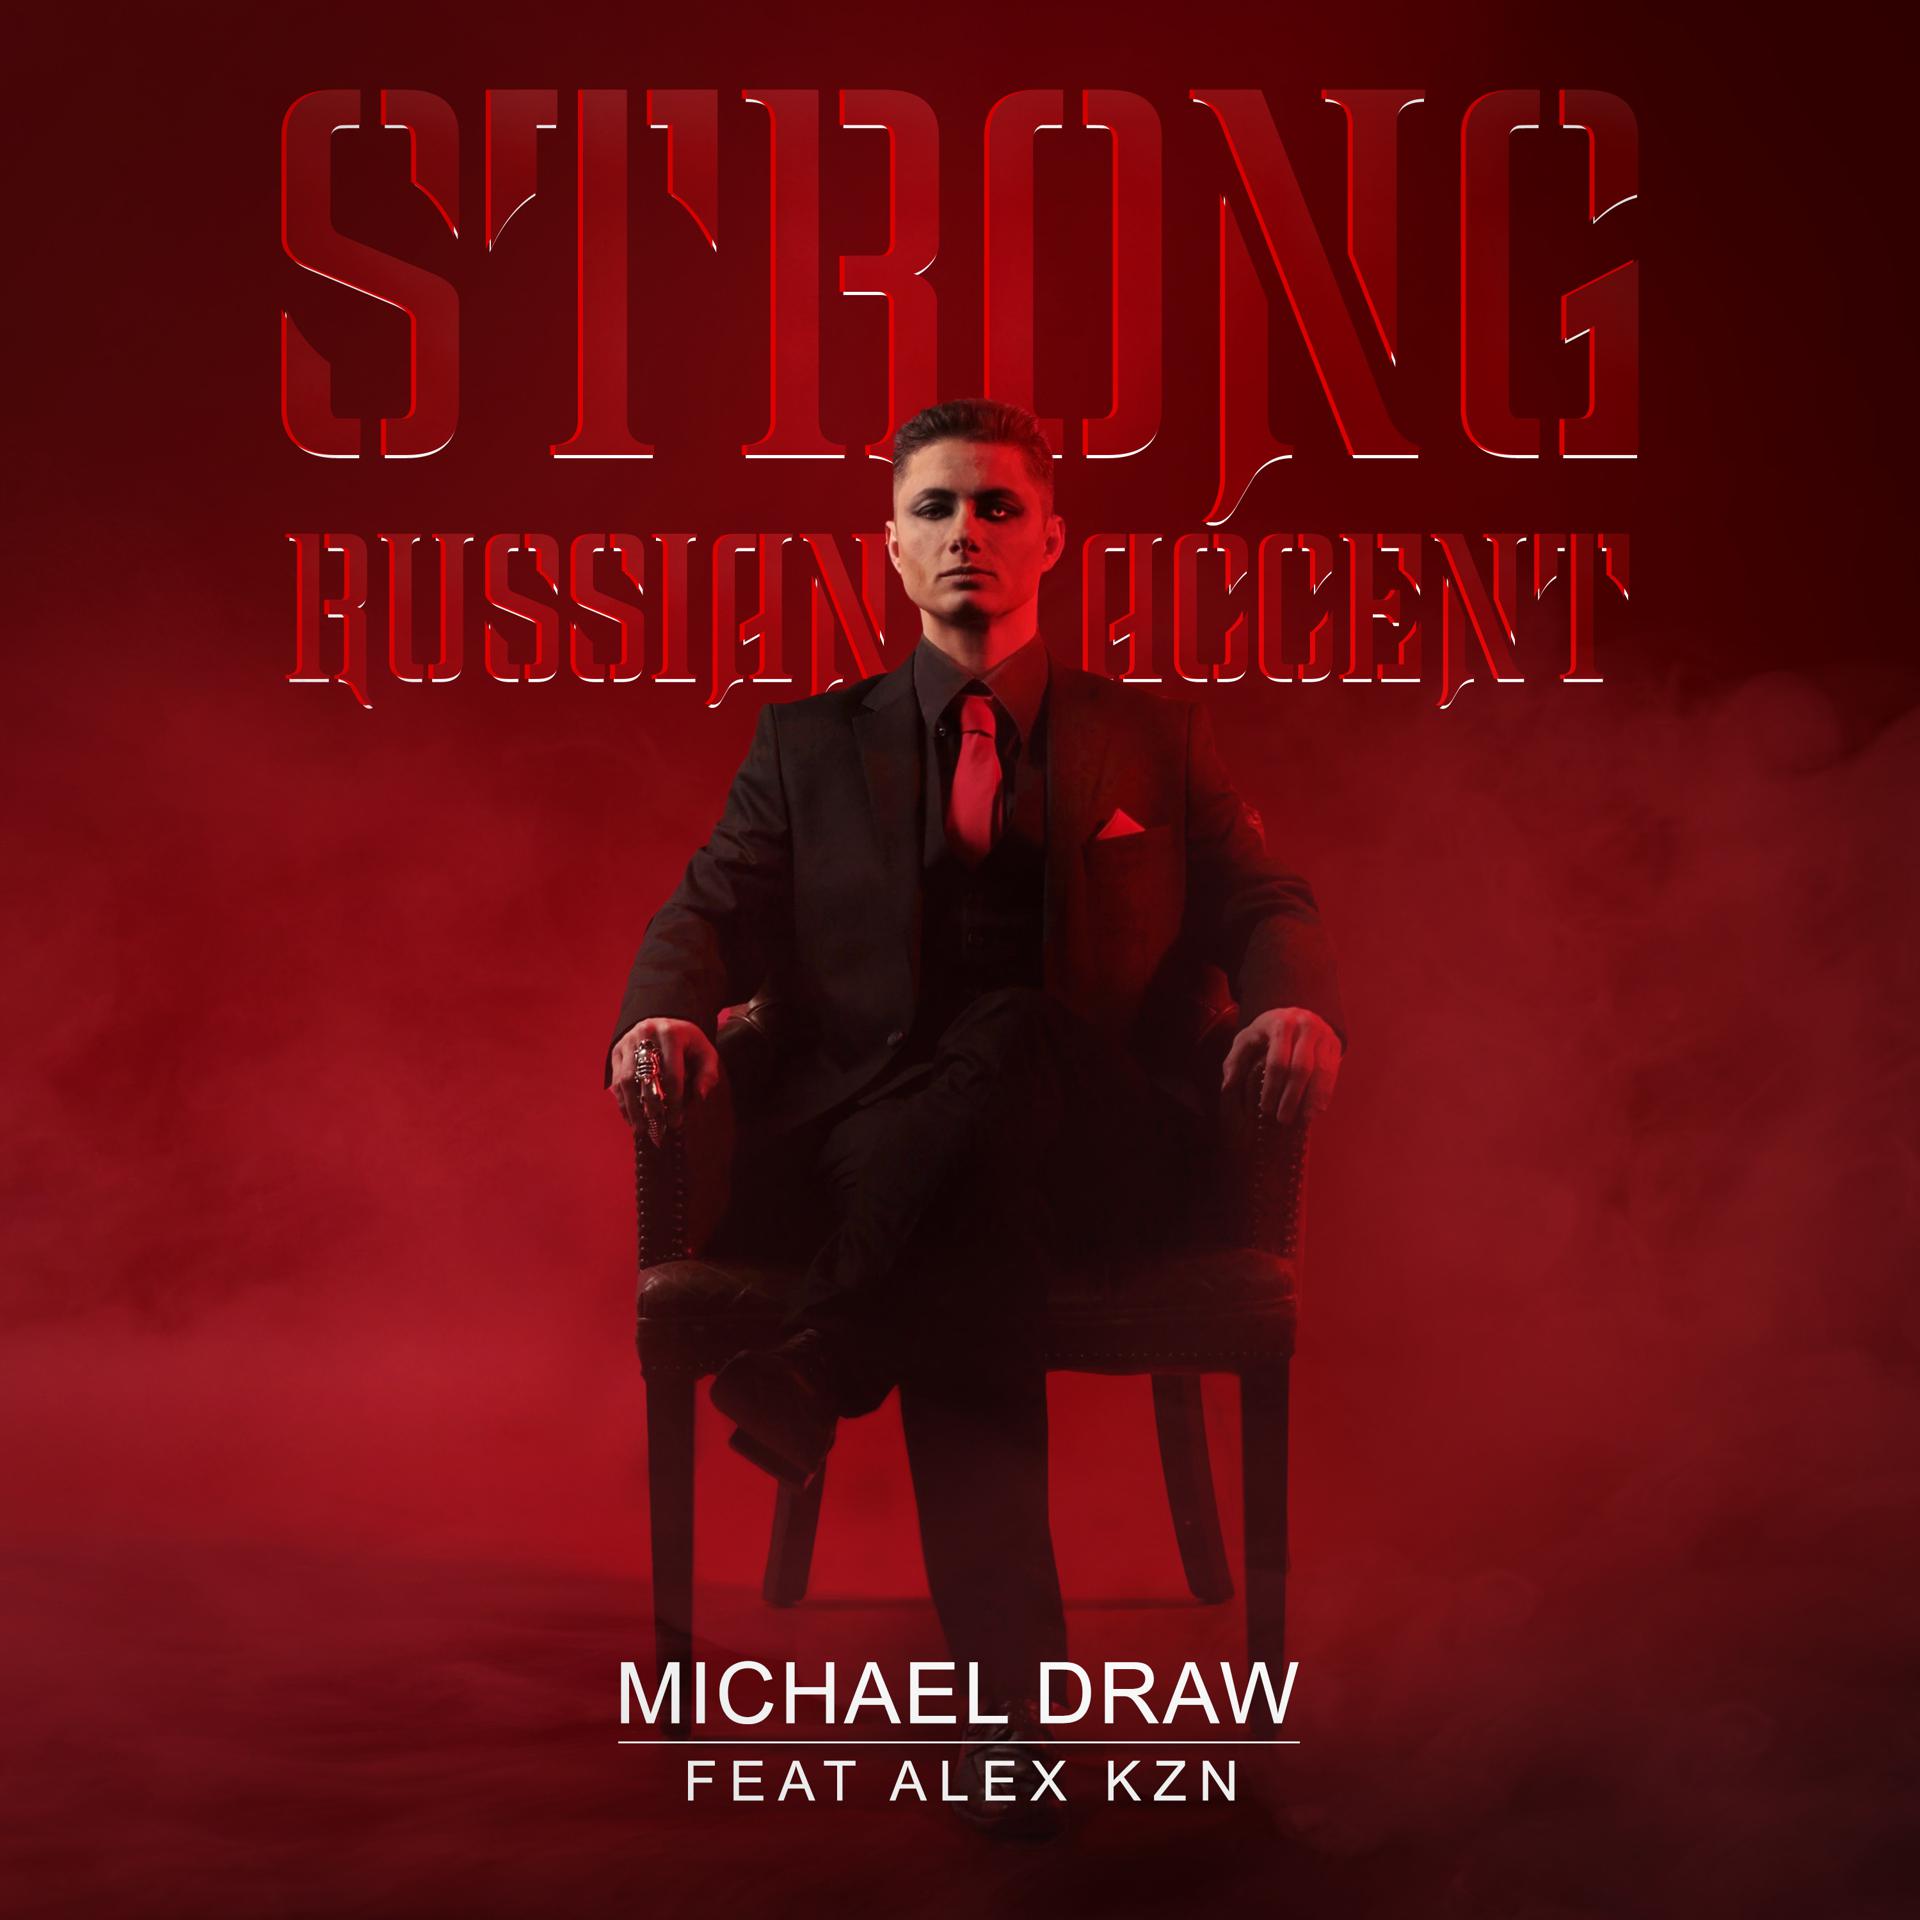 Strong Russian Accent Михаэль Драу. Michael draw strong Russian Accent. Strong Russian Accent. Хитмос. Strong russians